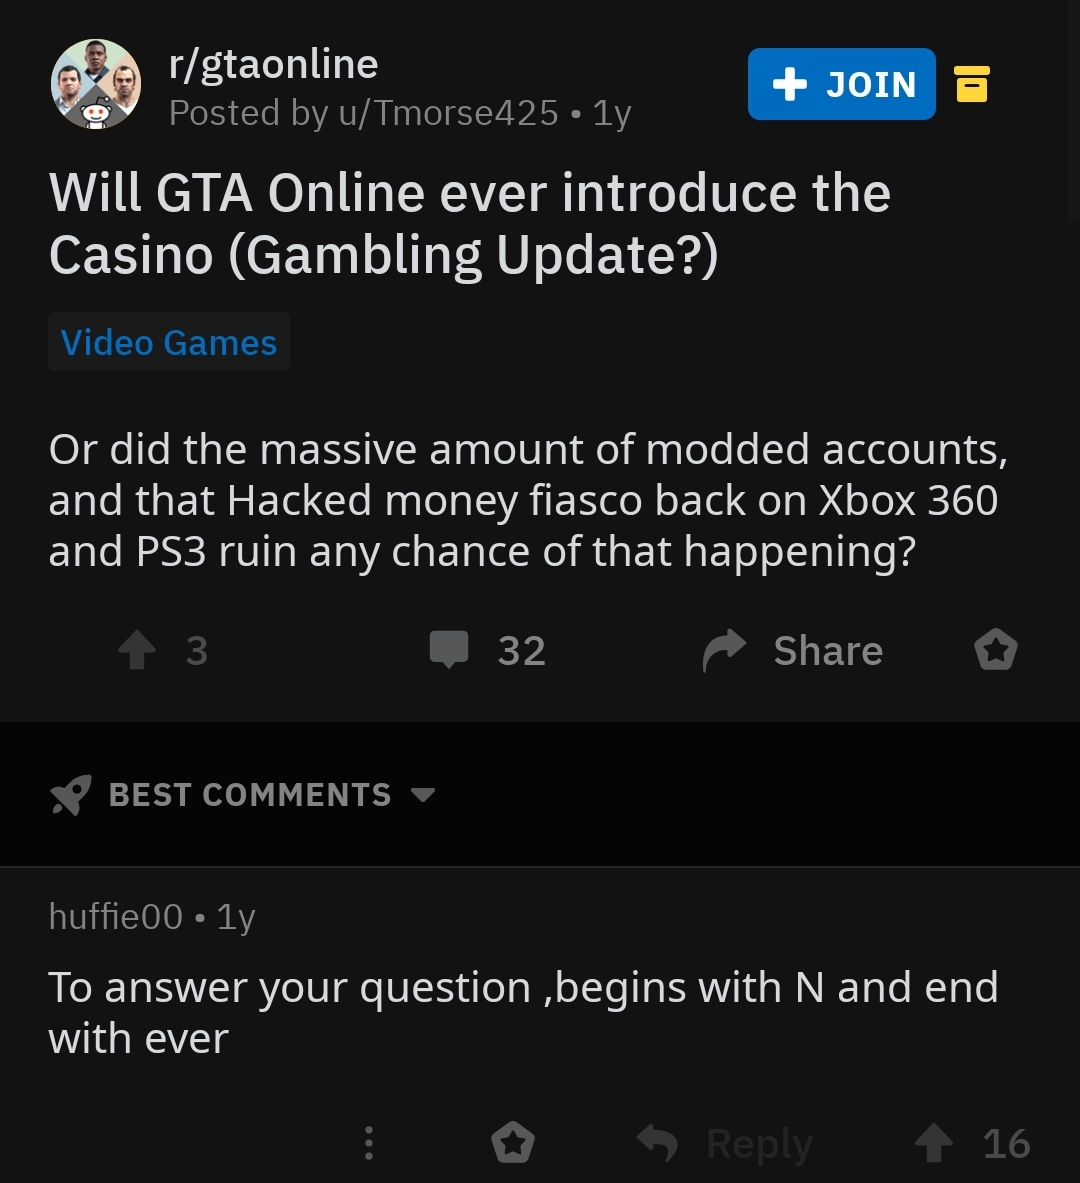 screenshot - sergtaonline Join Posted by uTmorse425 1y Will Gta Online ever introduce the Casino Gambling Update? Video Games Or did the massive amount of modded accounts, and that Hacked money fiasco back on Xbox 360 and PS3 ruin any chance of that happe